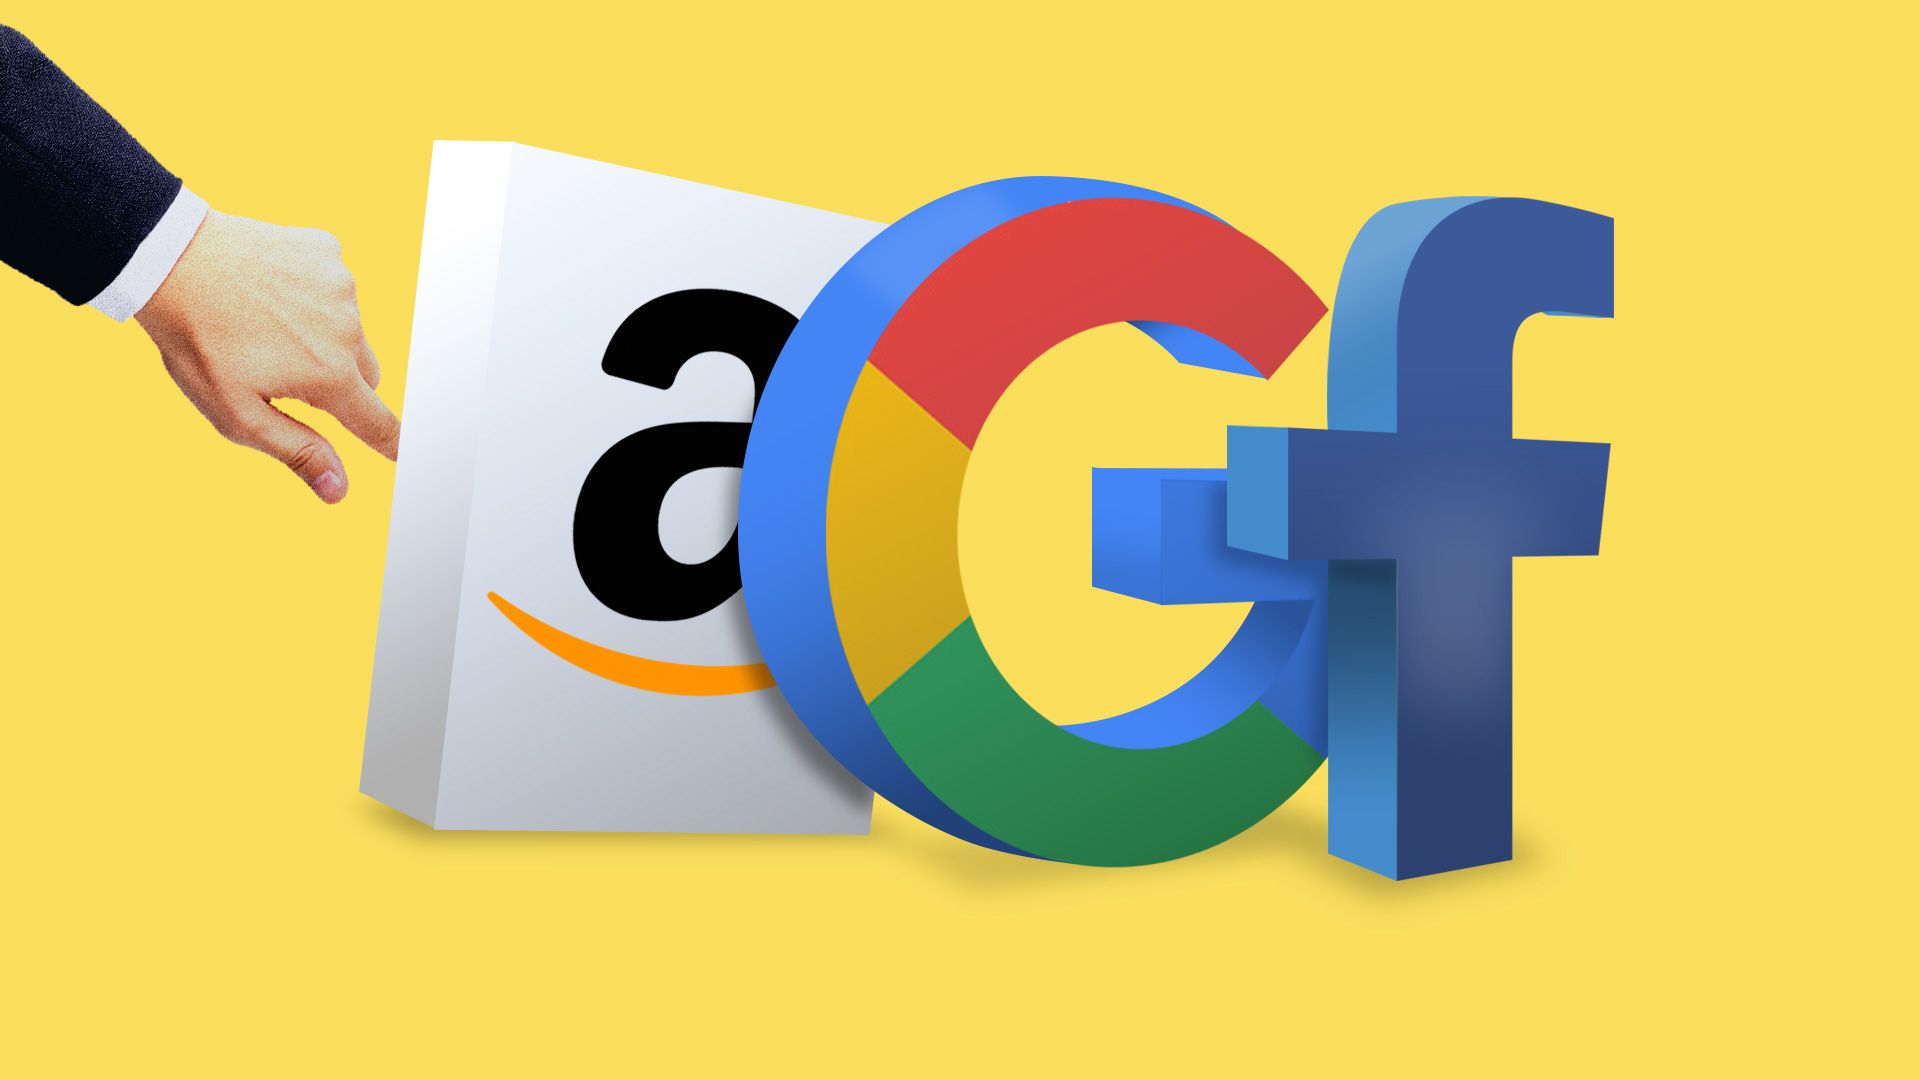 Illustration of a lawyer's hand reaching out to logos of Amazon, Google, Facebook